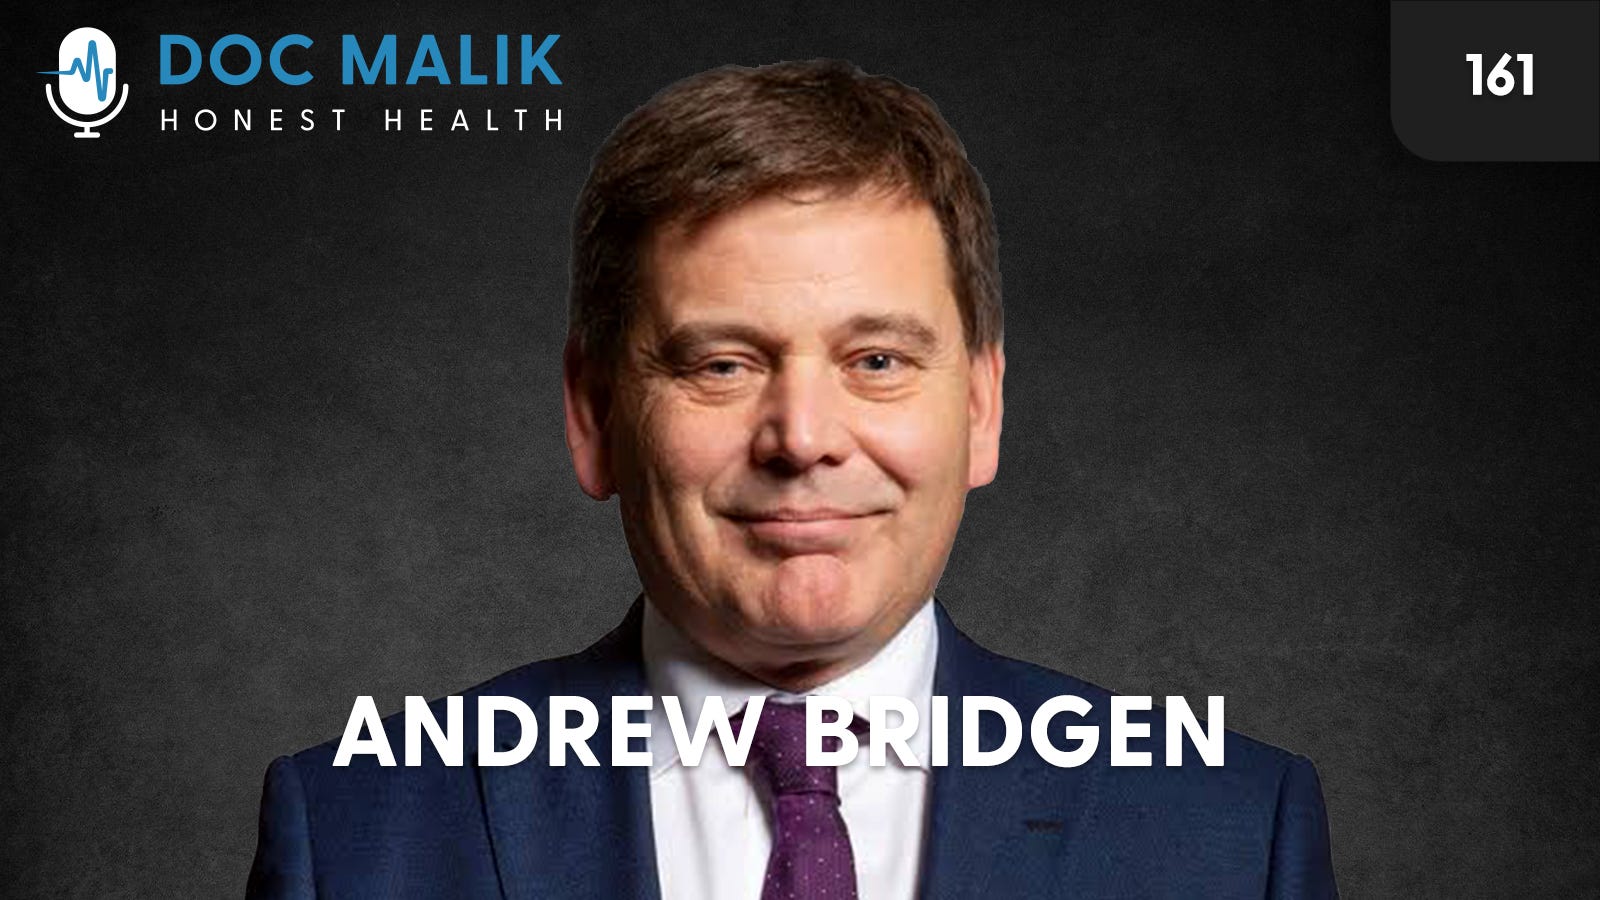 #161 - Andrew Bridgen MP, My First Ever Podcast (Better Late Than Never)